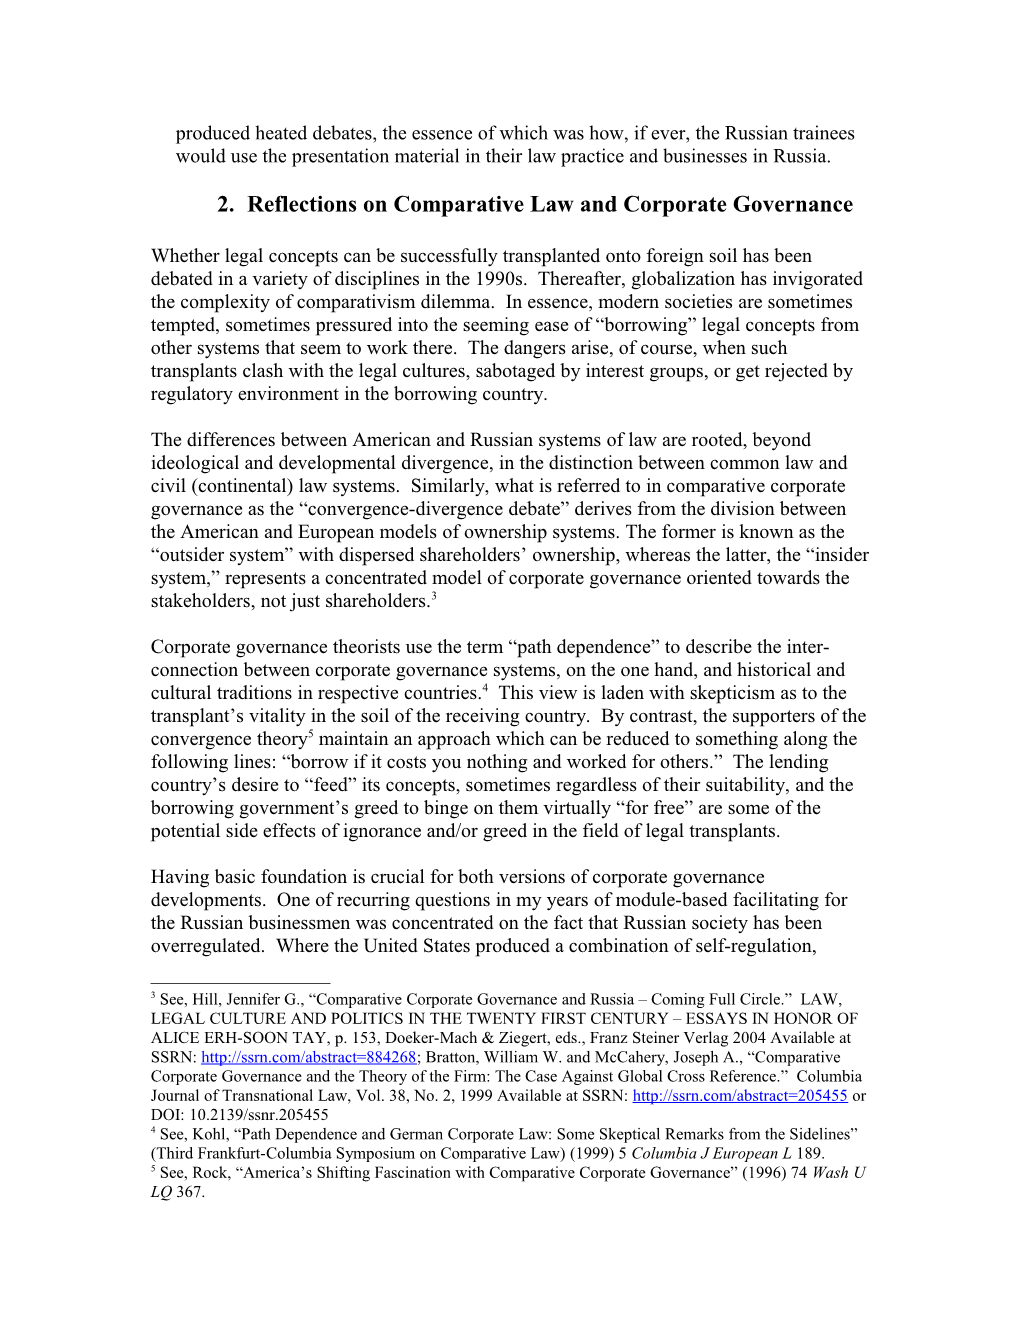 Approaches to Teaching Comparative Corporate Governance